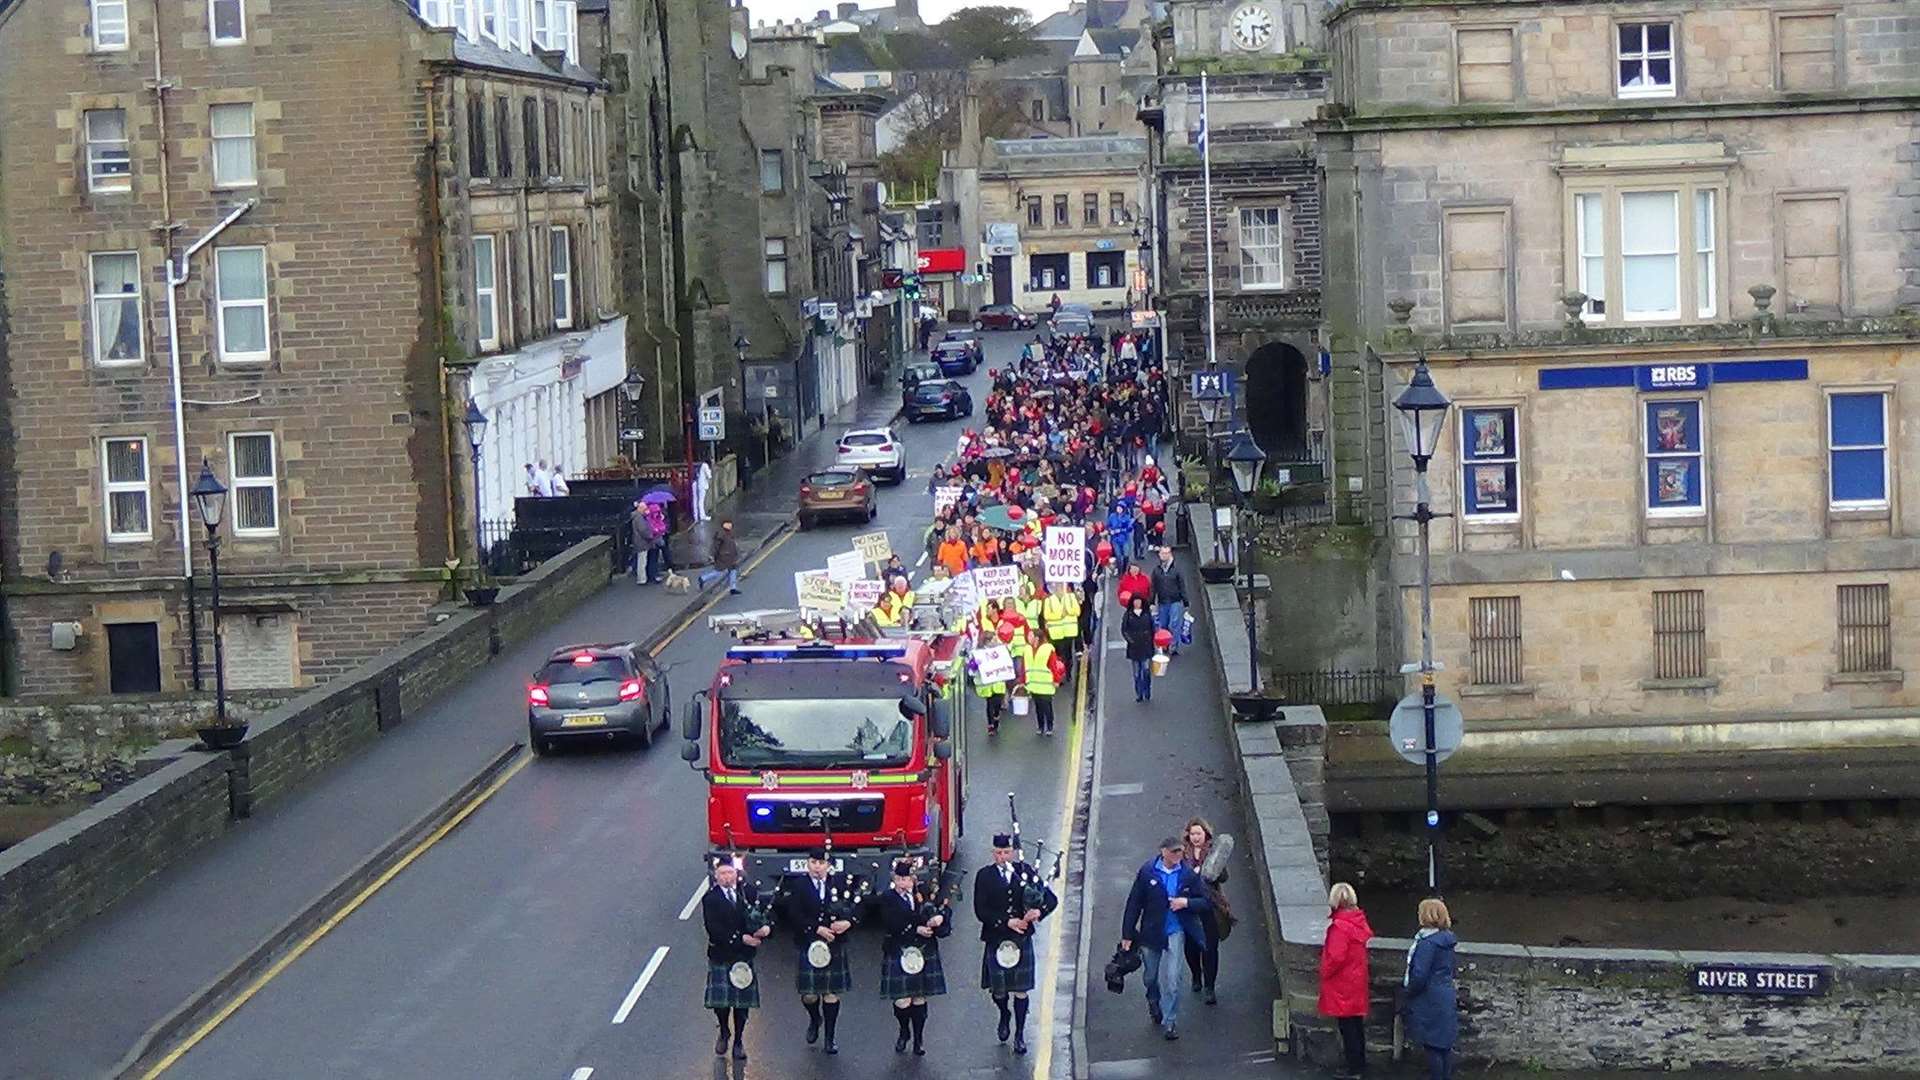 The march travelling through Bridge Street on their way to Caithness General Hospital. Photo: Will Clark